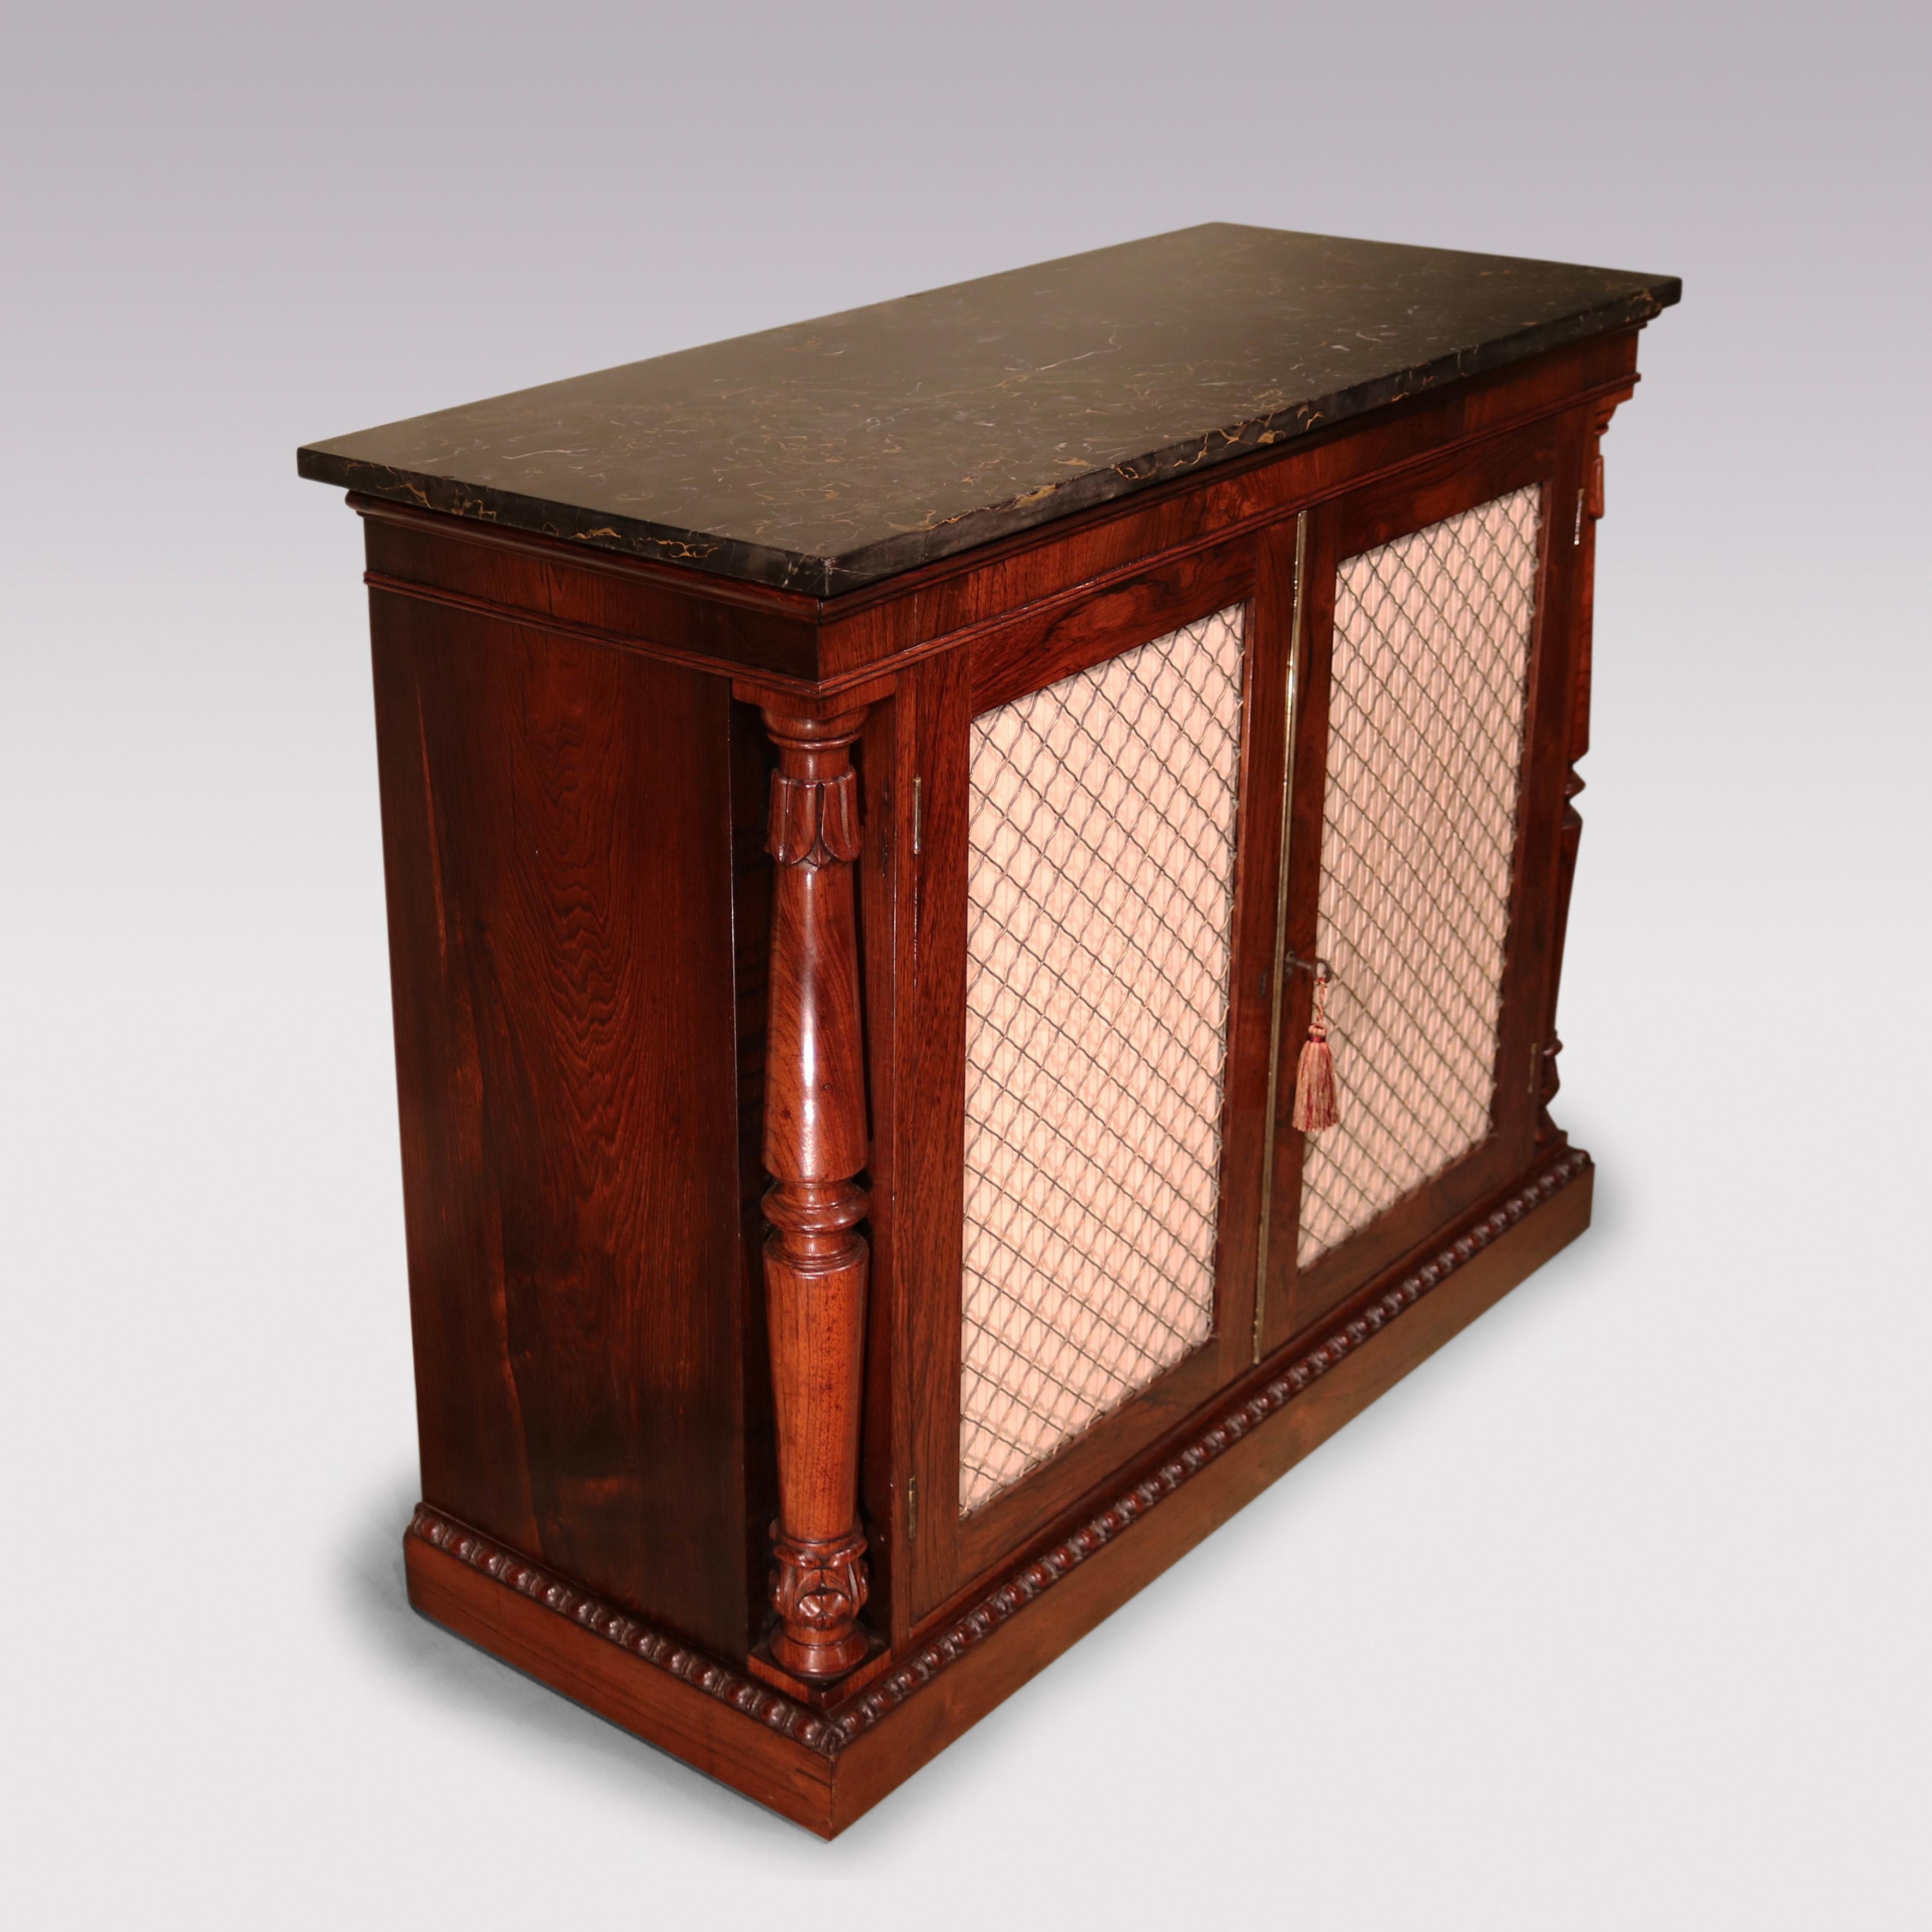 A fine quality William IV period rosewood 2-door Chiffonier, having original veined marble top above original brass grille pleated doors flanked by lotus-carved columns ending on beaded plinth base.